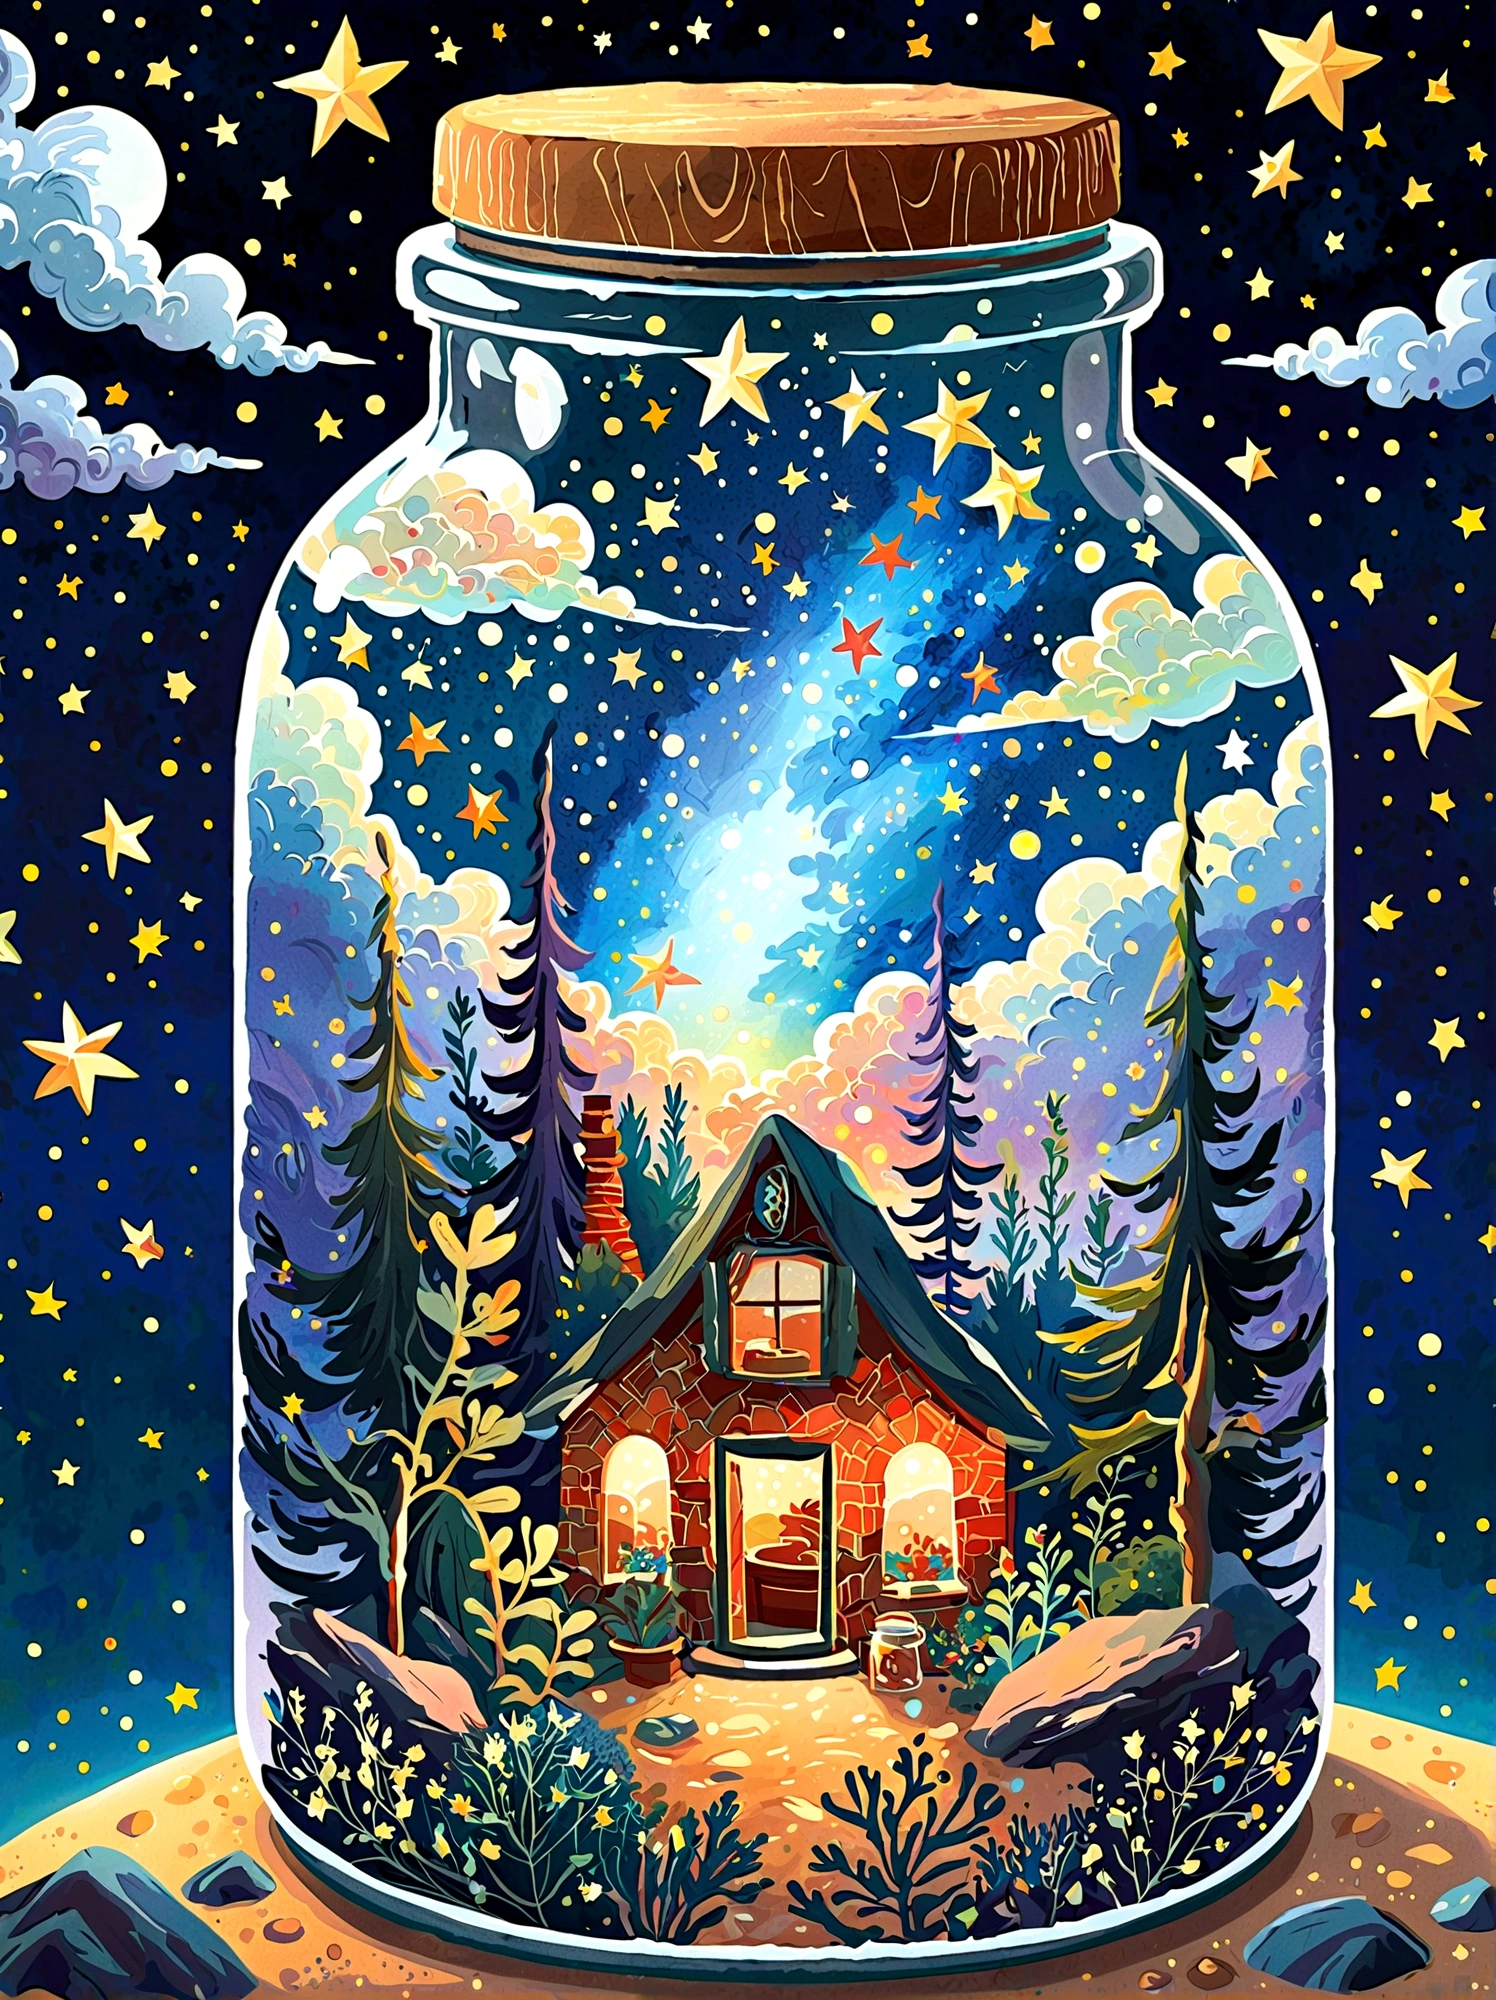 pzsj1, Masterpiece，Top quality，(Very delicate and beautiful starry sky scenery trapped in a jar), world masterpiece theater, High resolution isometric, Top quality, illustration, Thick coating, canvas, painting, realism, Realism